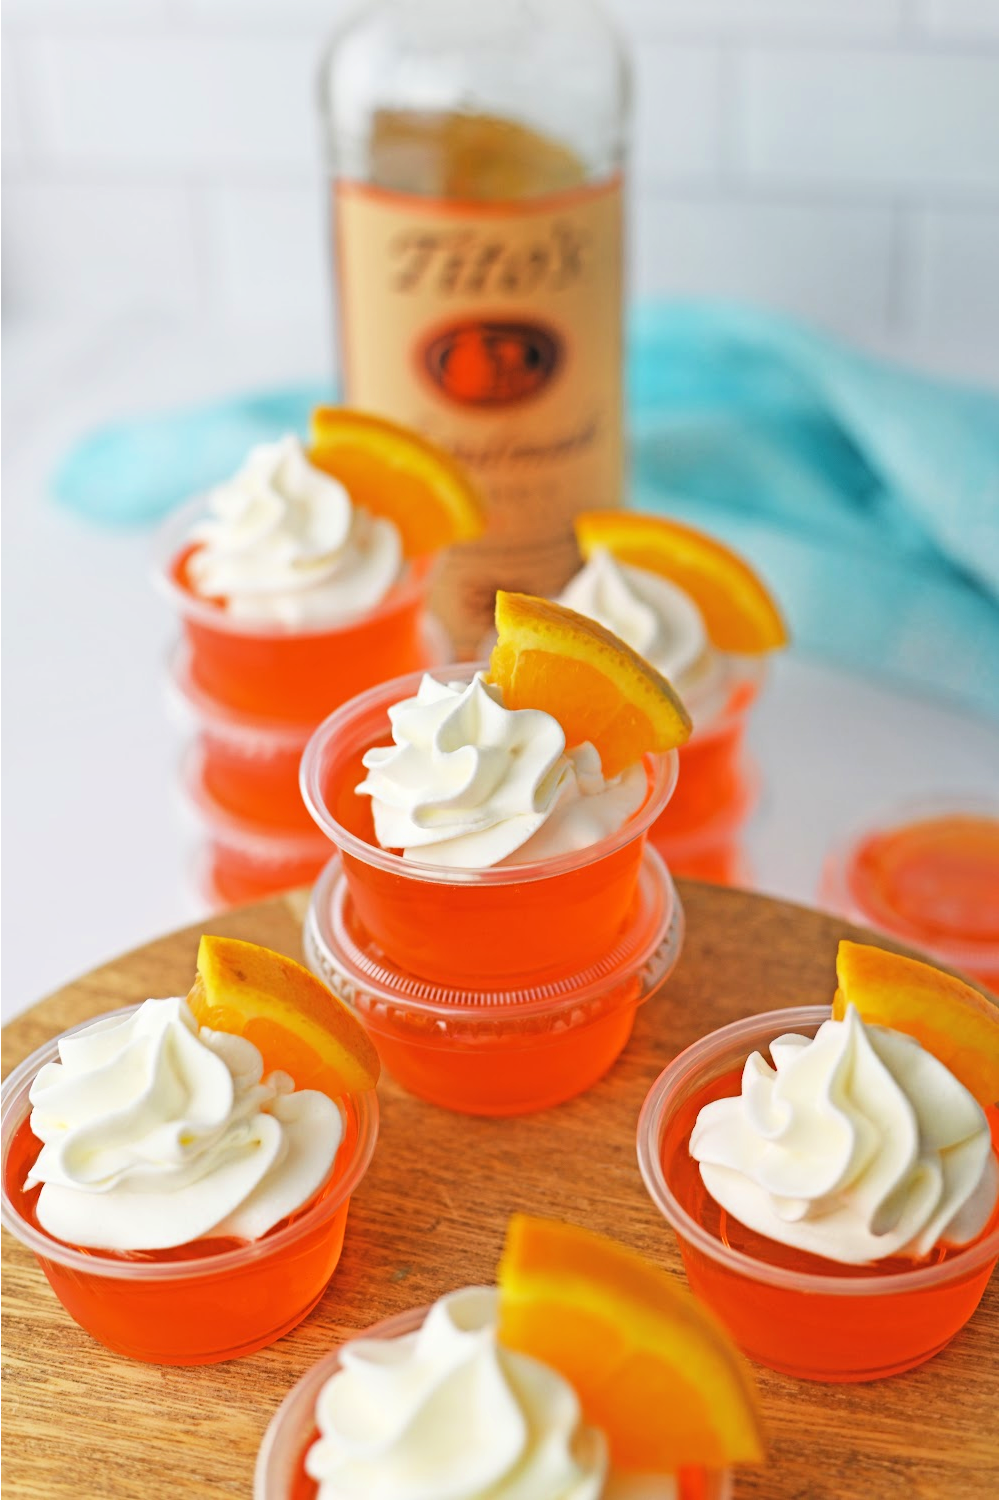 orange jello shots stacked with a whipped cream topping and slice or orange